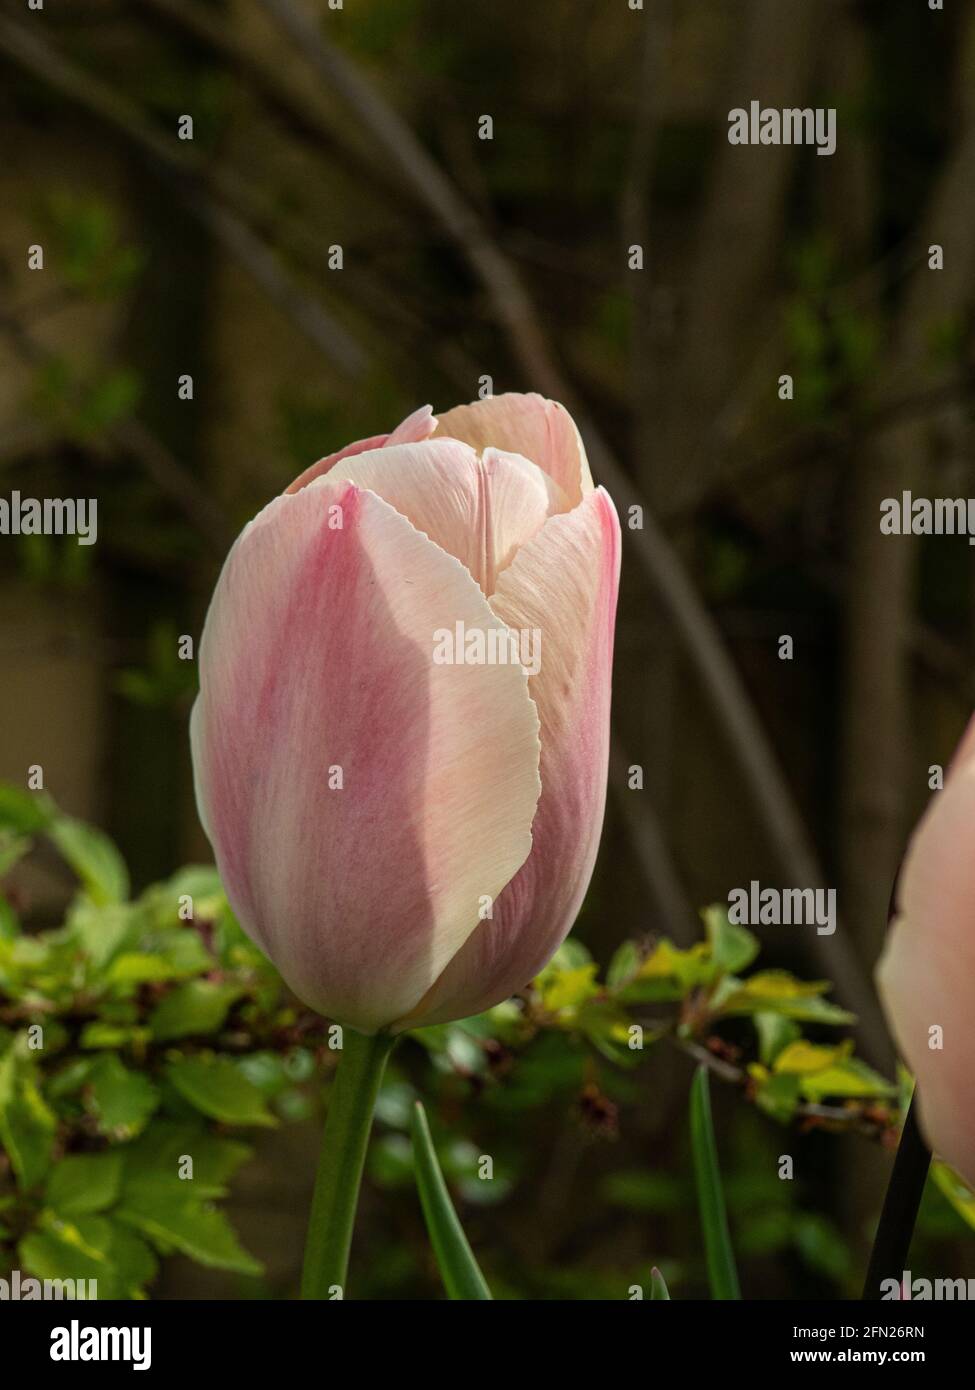 A close up of a single salmon pink flower of the tulip Salmon Van Eijk Stock Photo